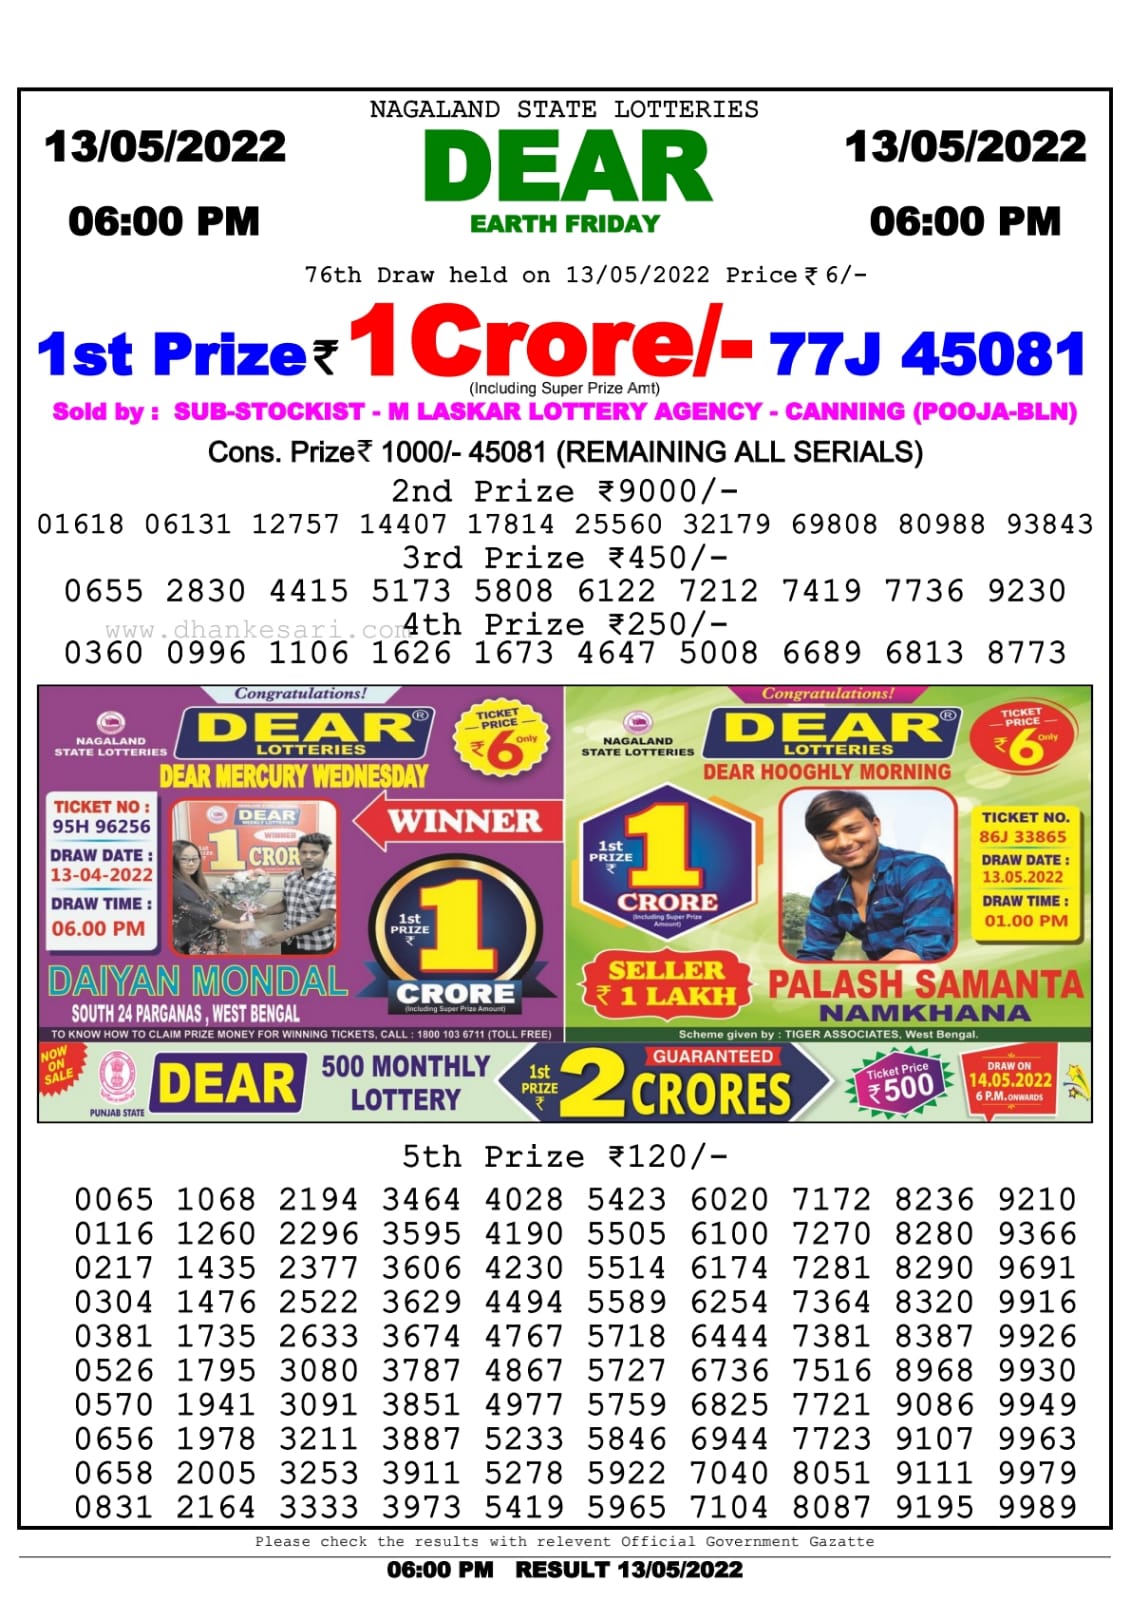 Dear Lottery Nagaland state Lottery Results 06.00 pm 13.05.2022